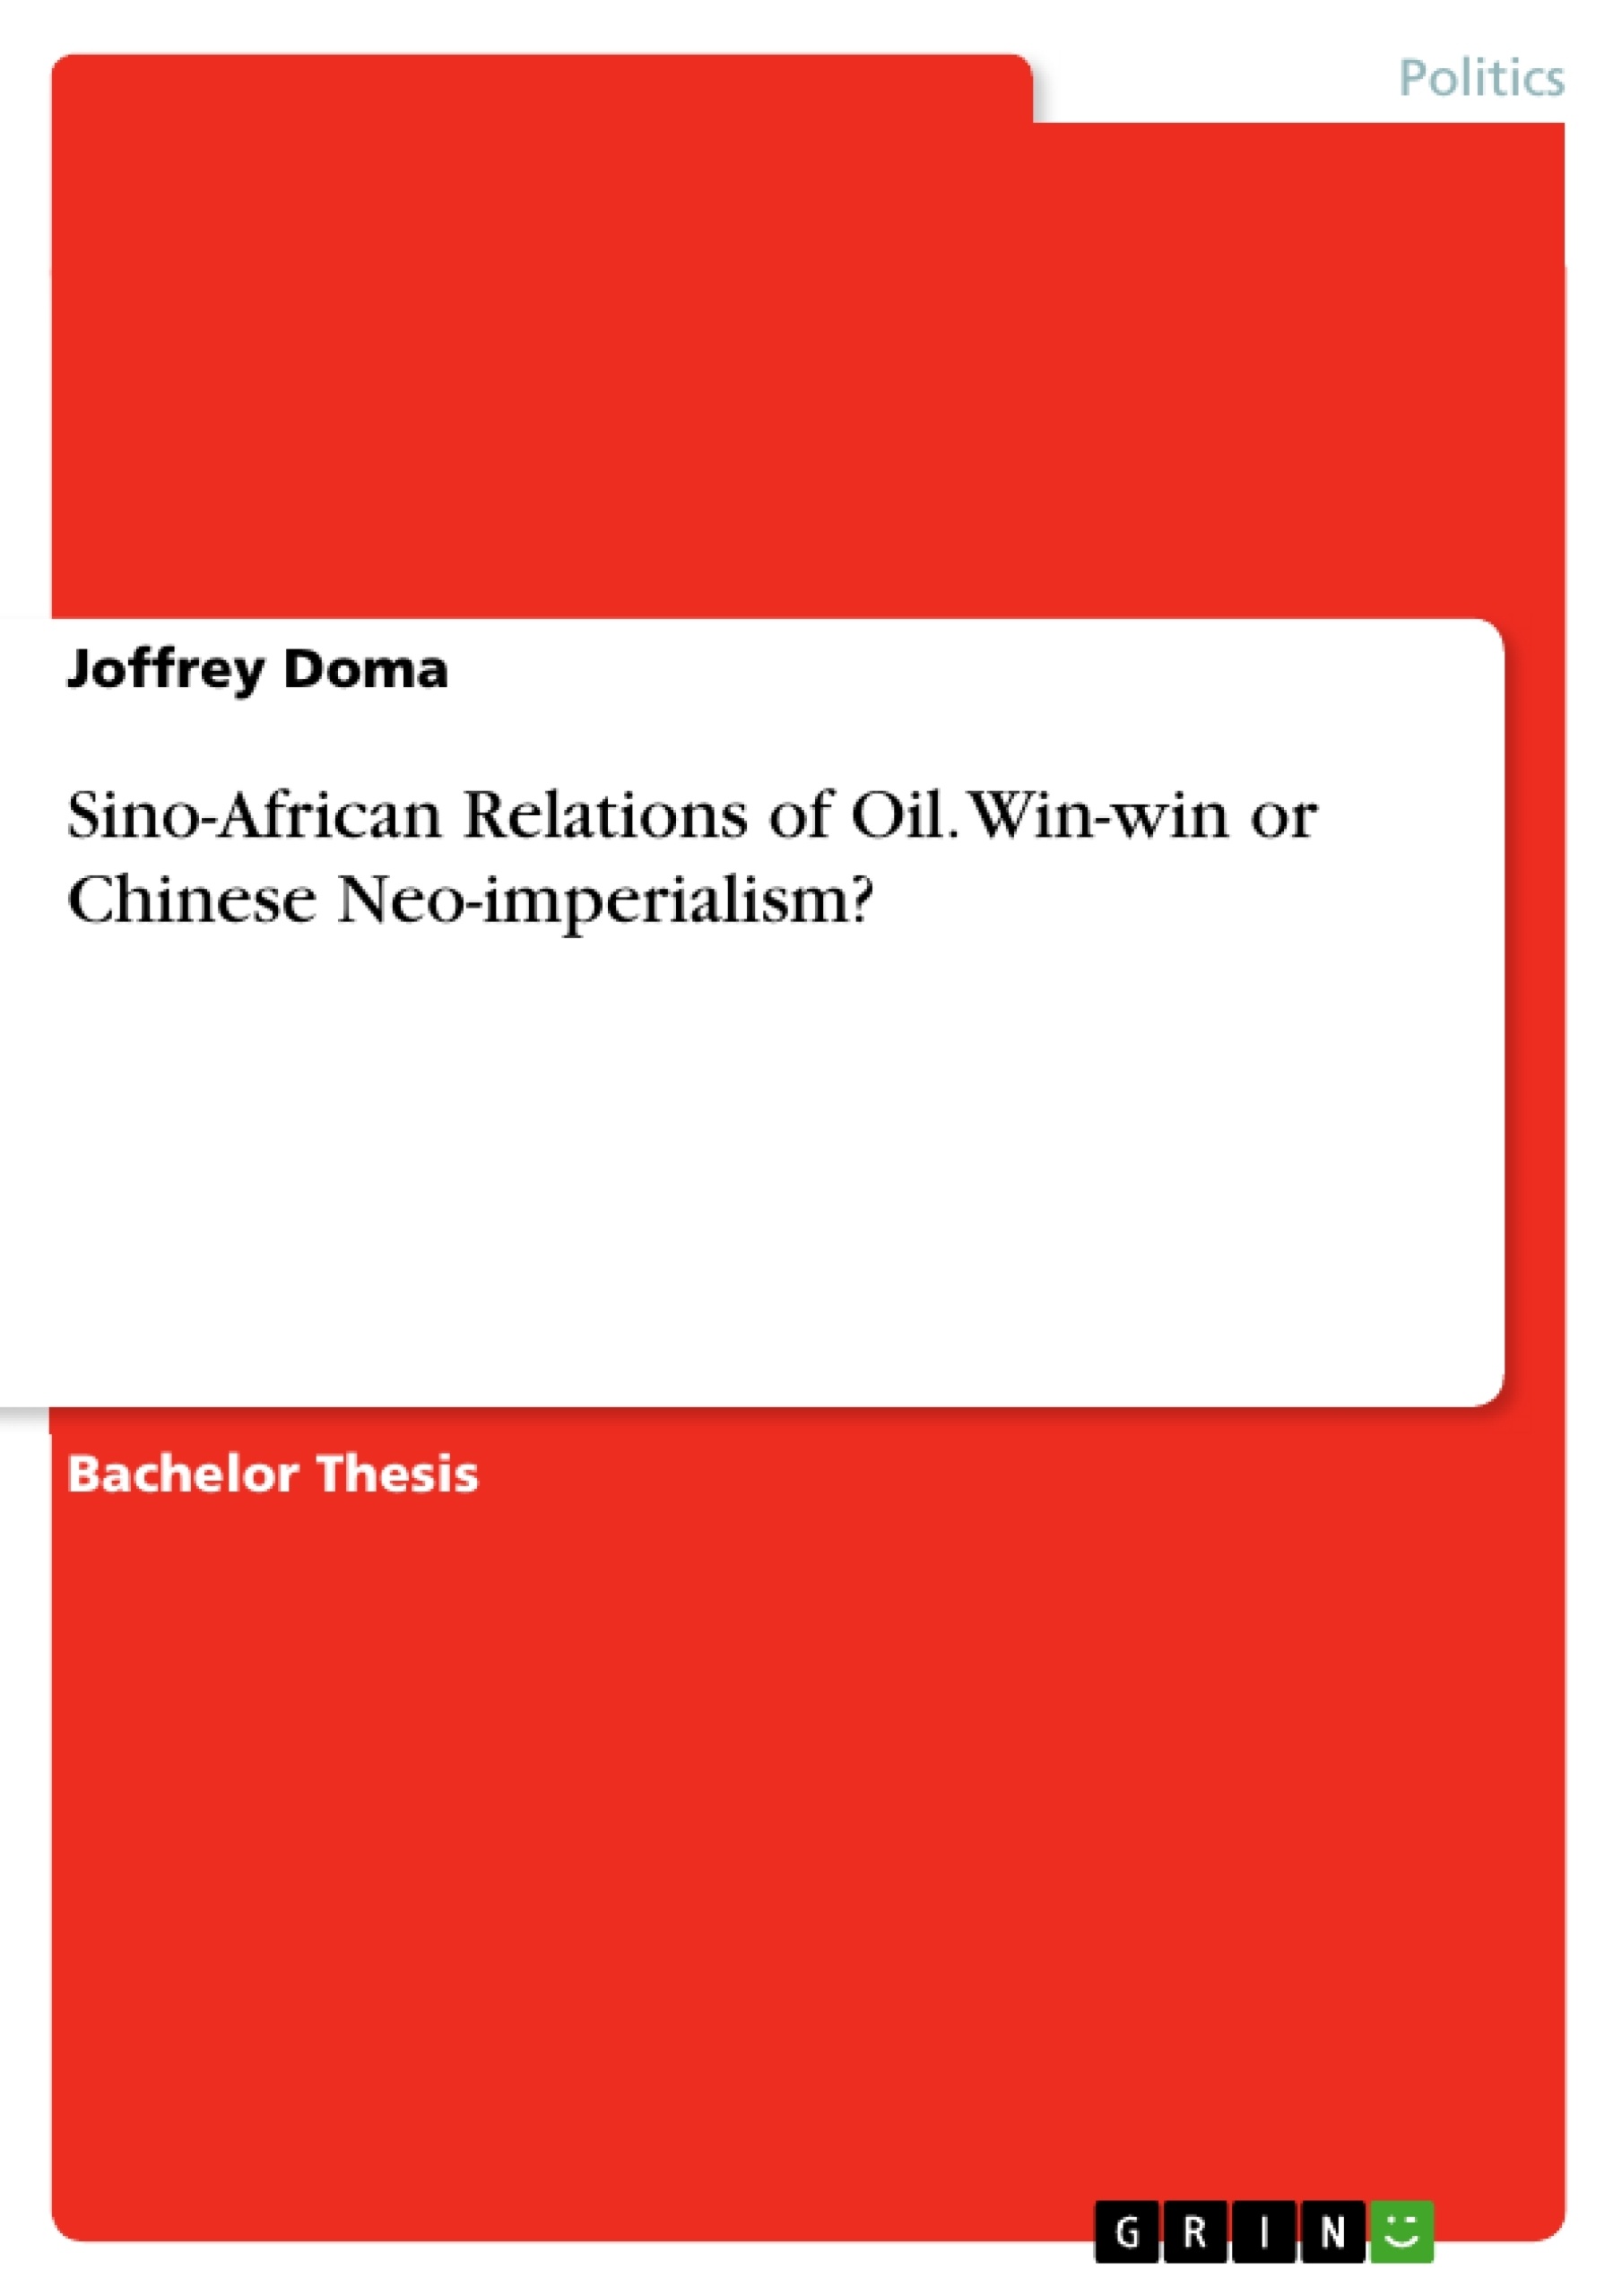 Titre: Sino-African Relations of Oil. Win-win or Chinese Neo-imperialism?